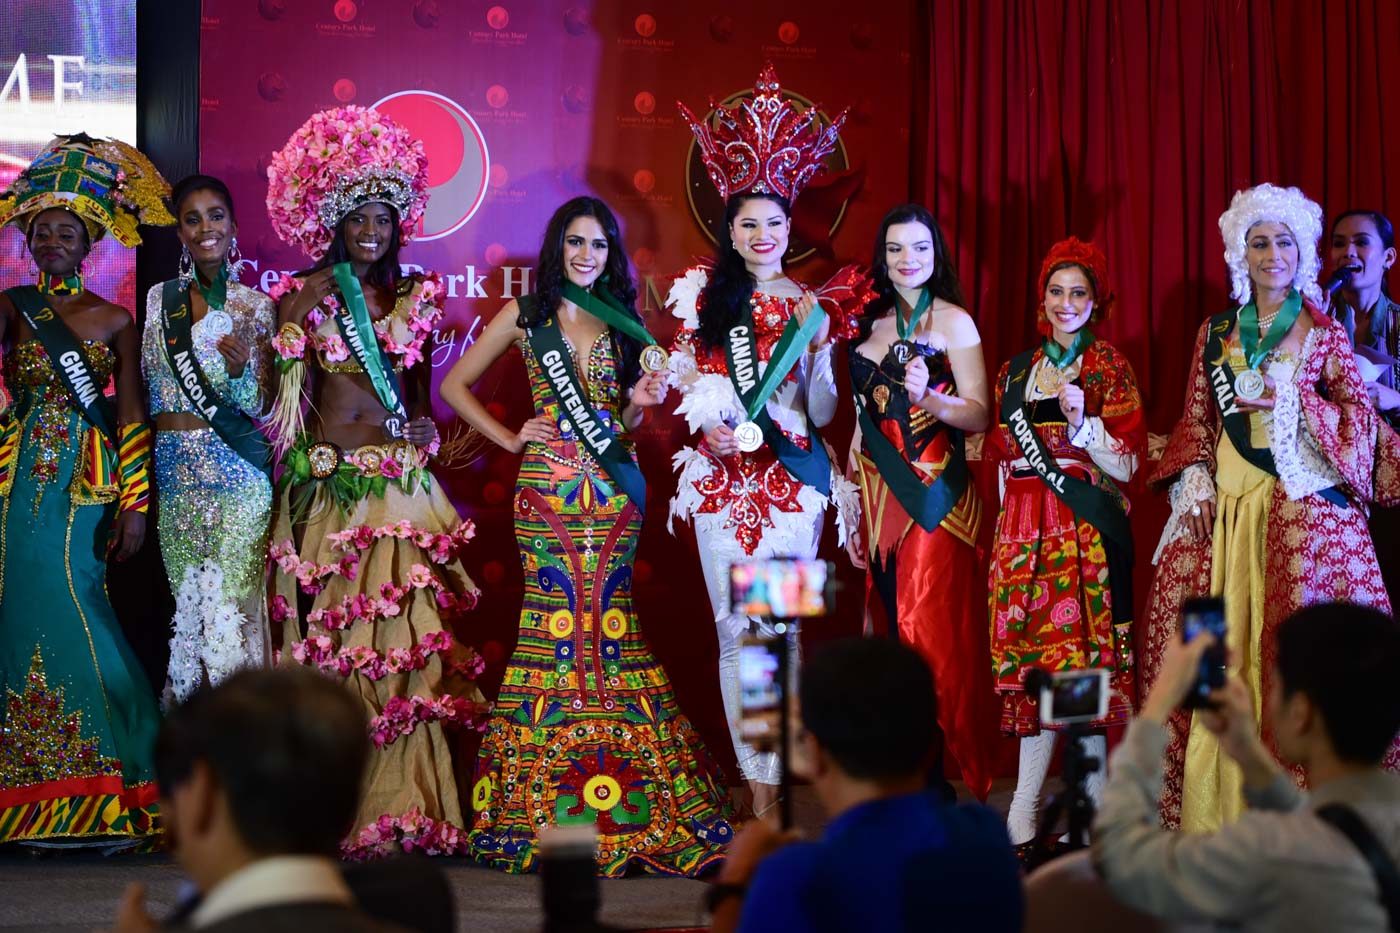 IN PHOTOS: The national costumes at Miss Earth 2017